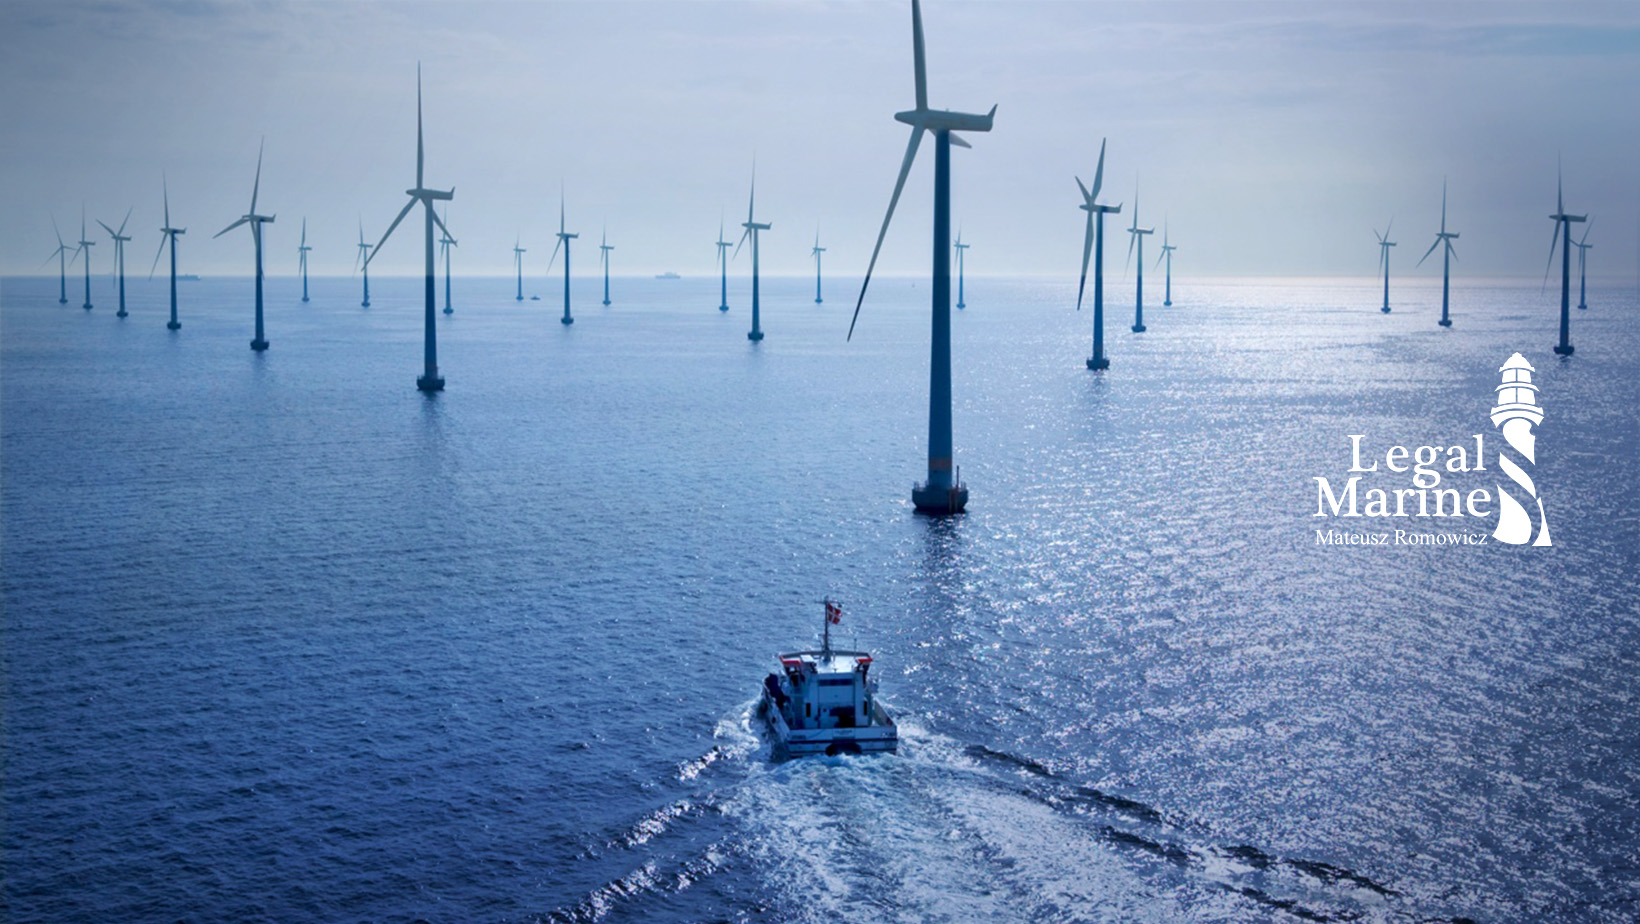 Offshore wind farms as critical infrastructure in the security system - MarinePoland.com